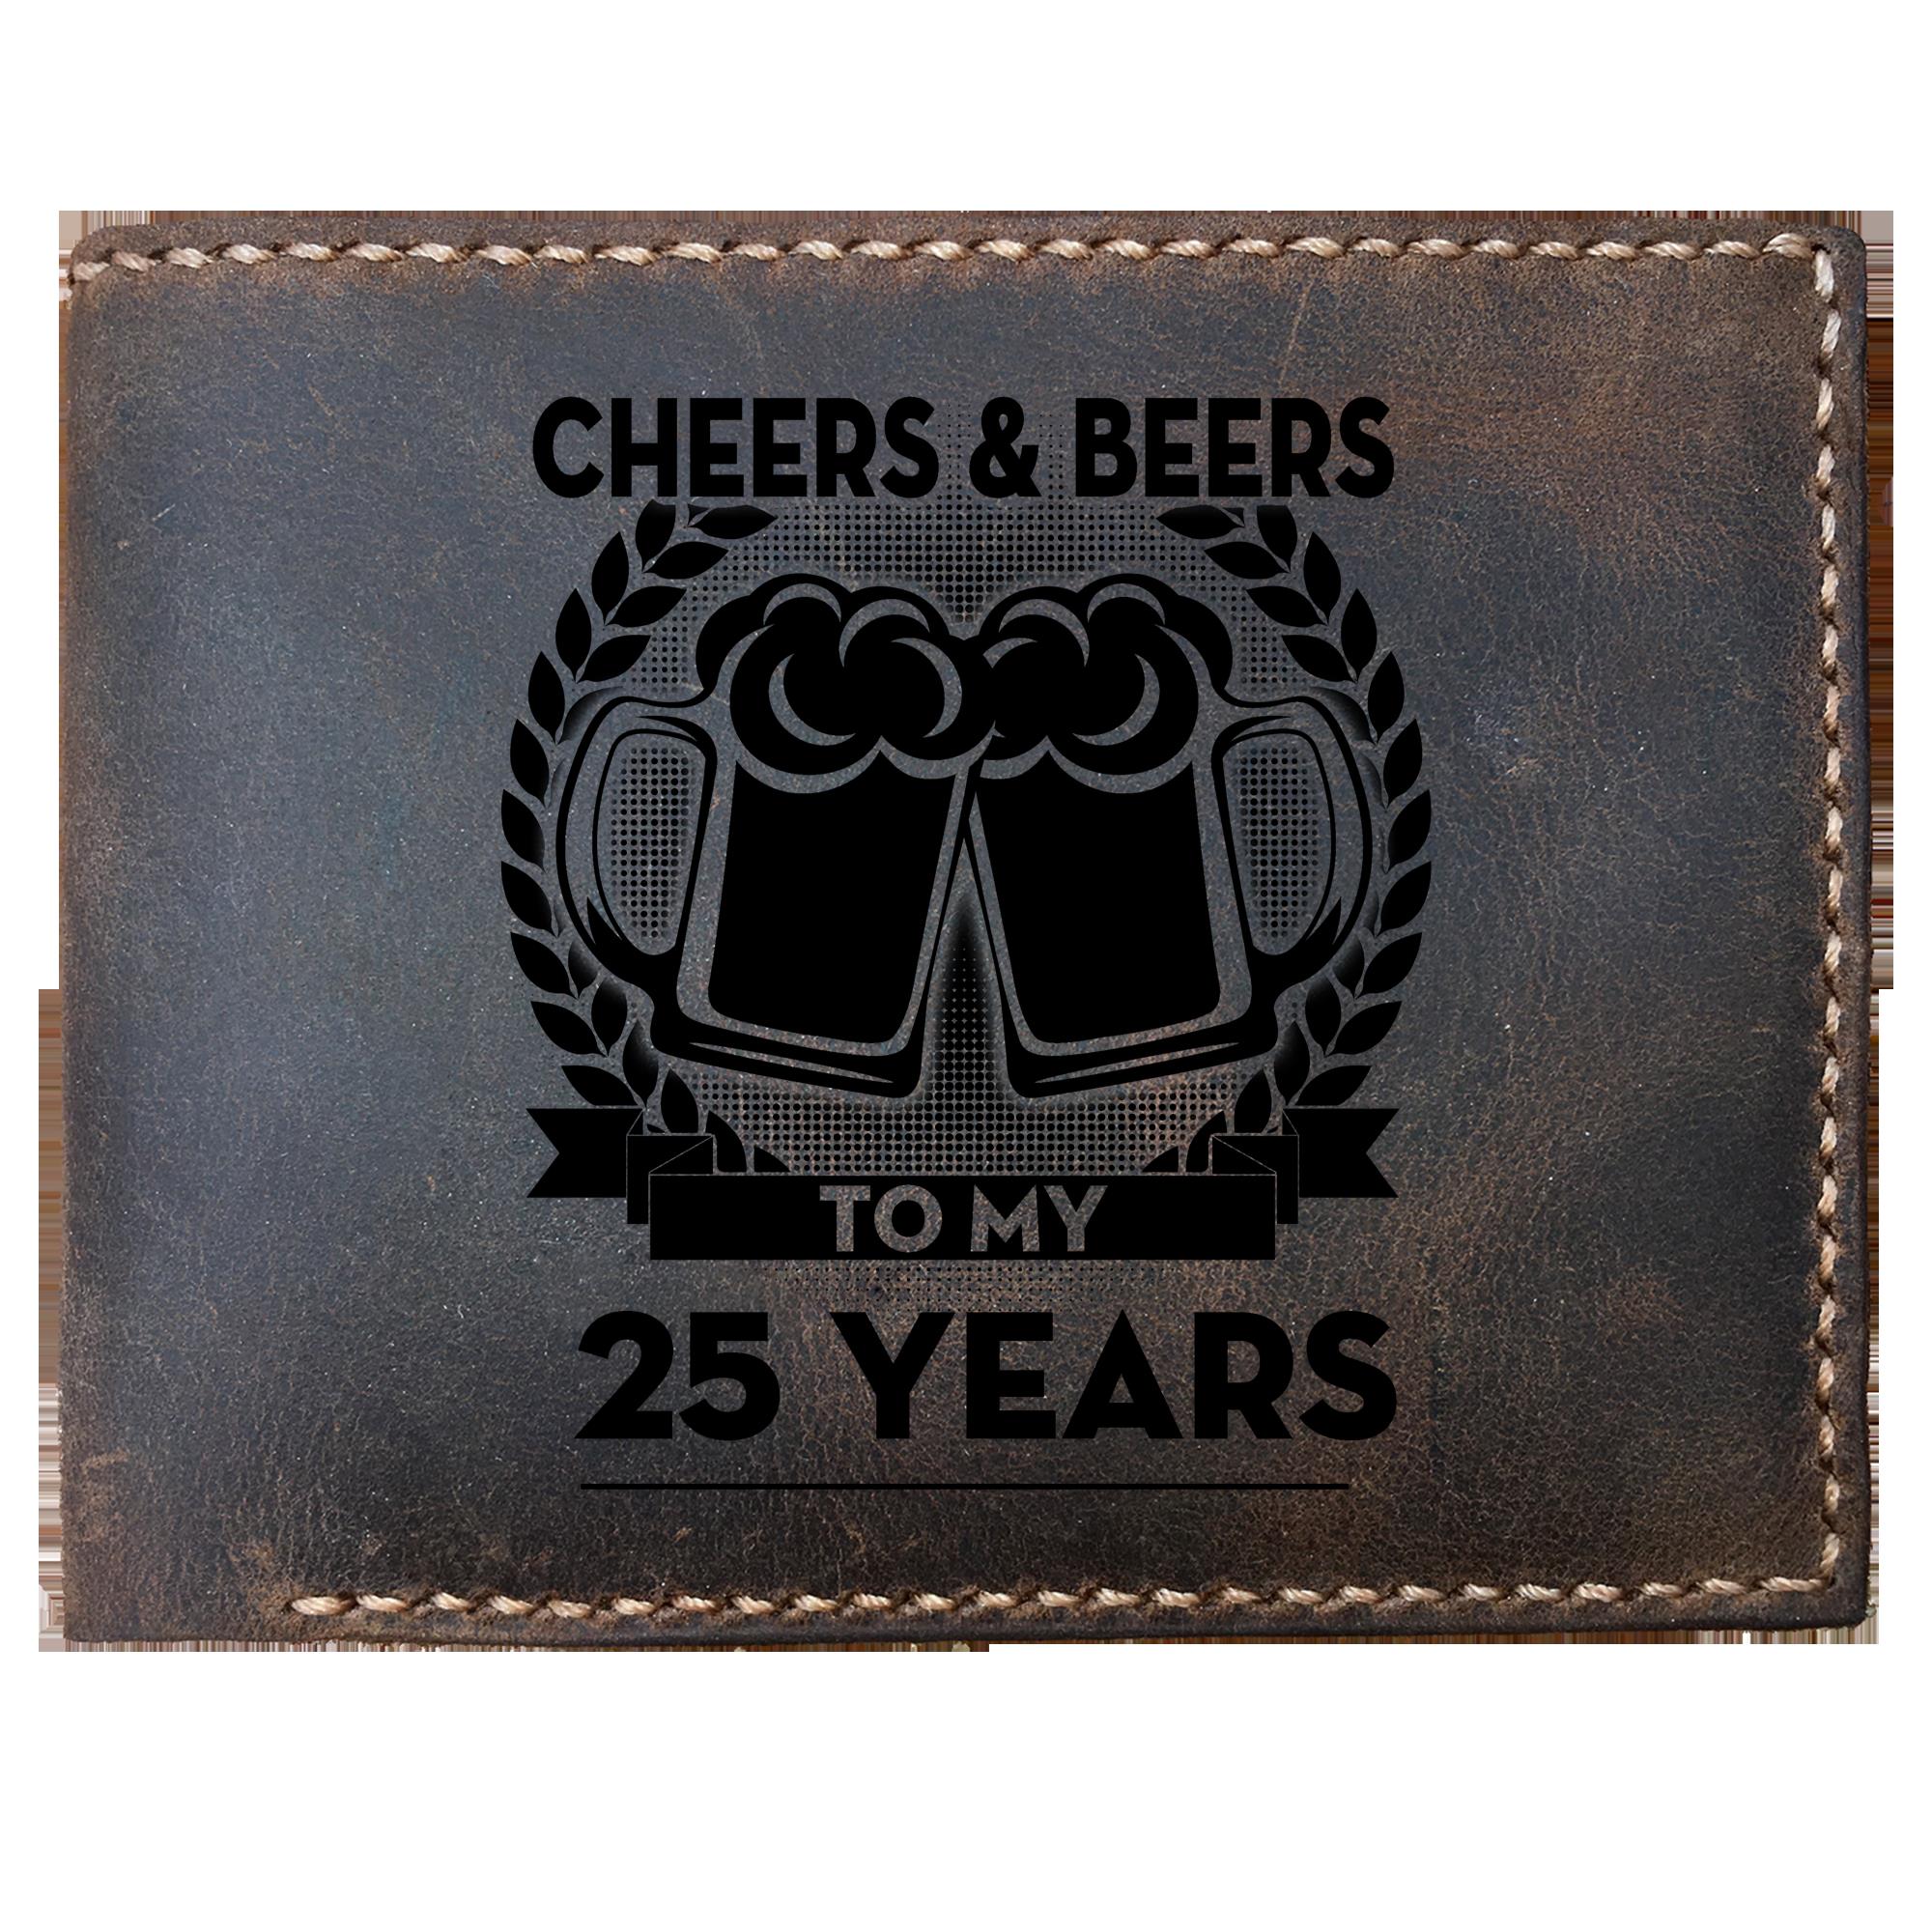 Skitongifts Funny Custom Laser Engraved Bifold Leather Wallet For Men, Cheers And Beers To My Customize Years